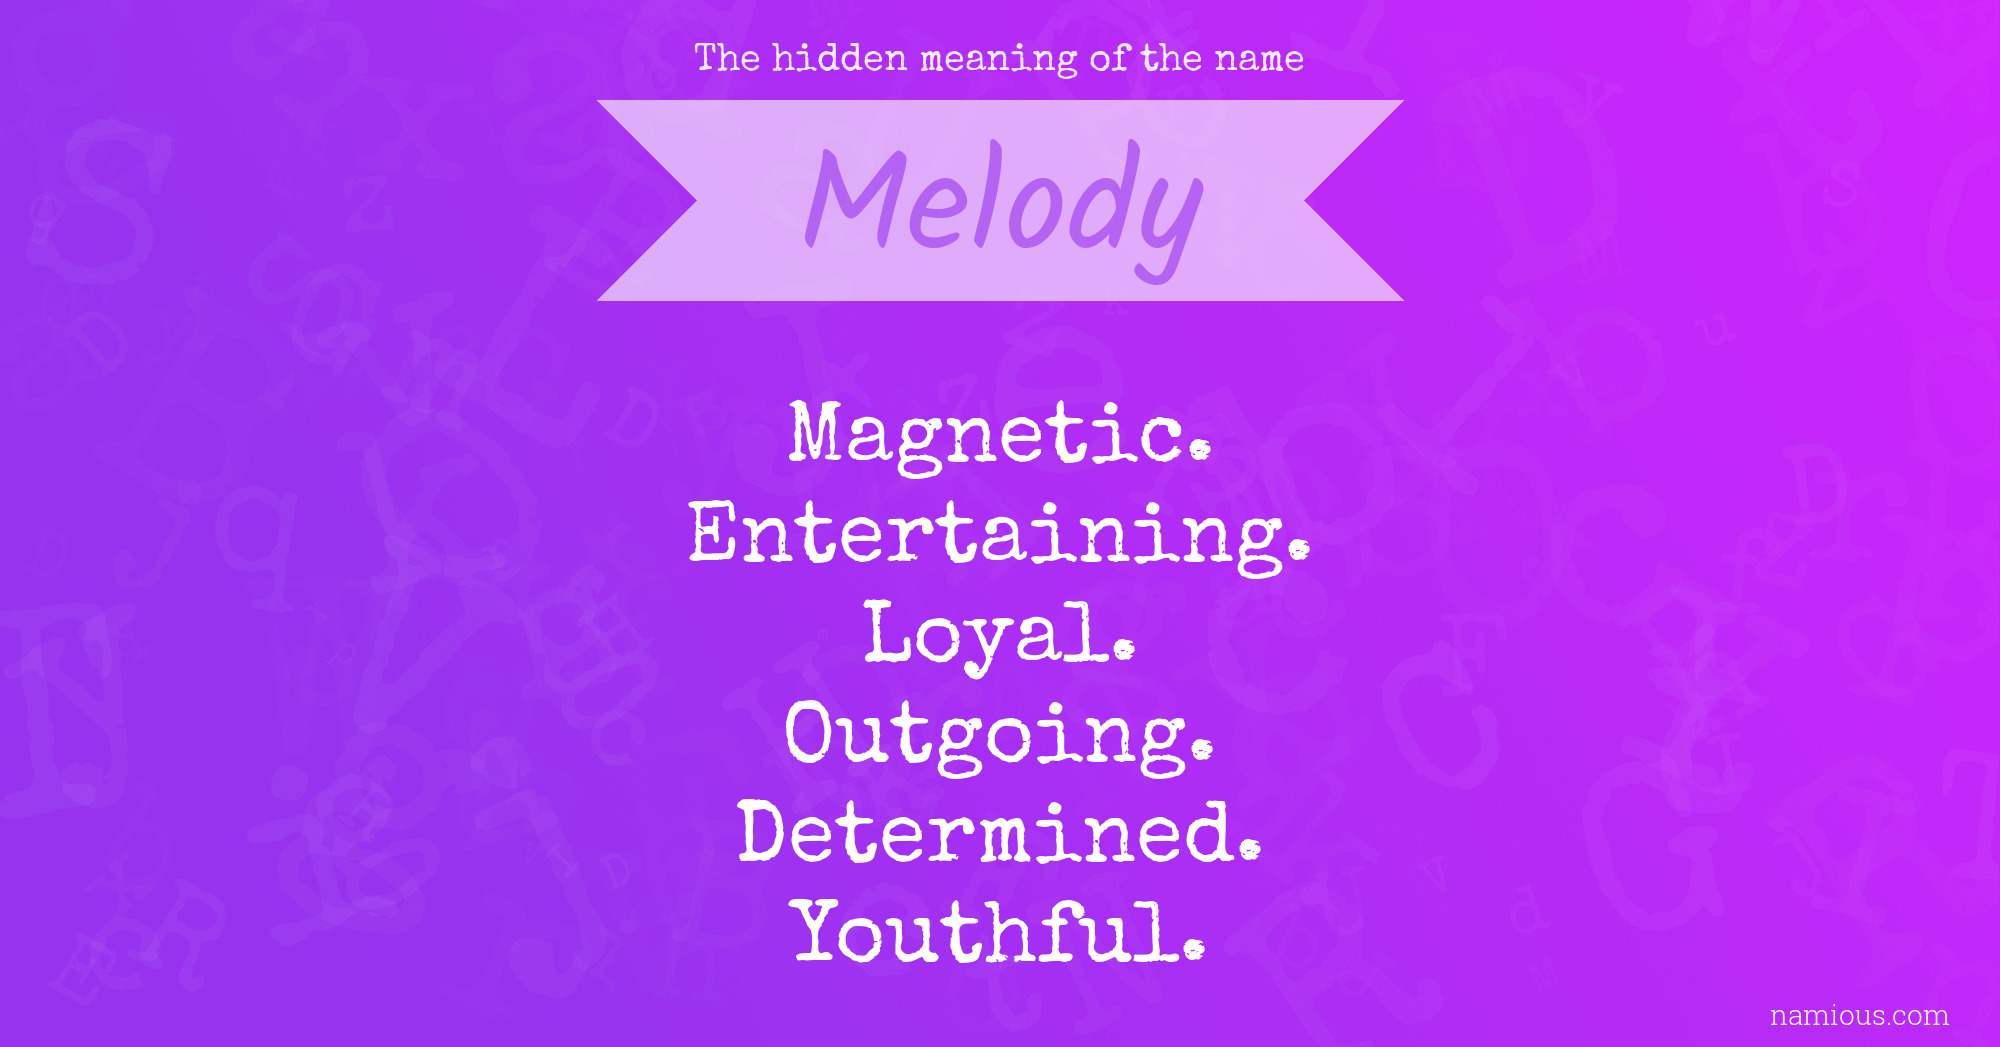 The hidden meaning of the name Melody